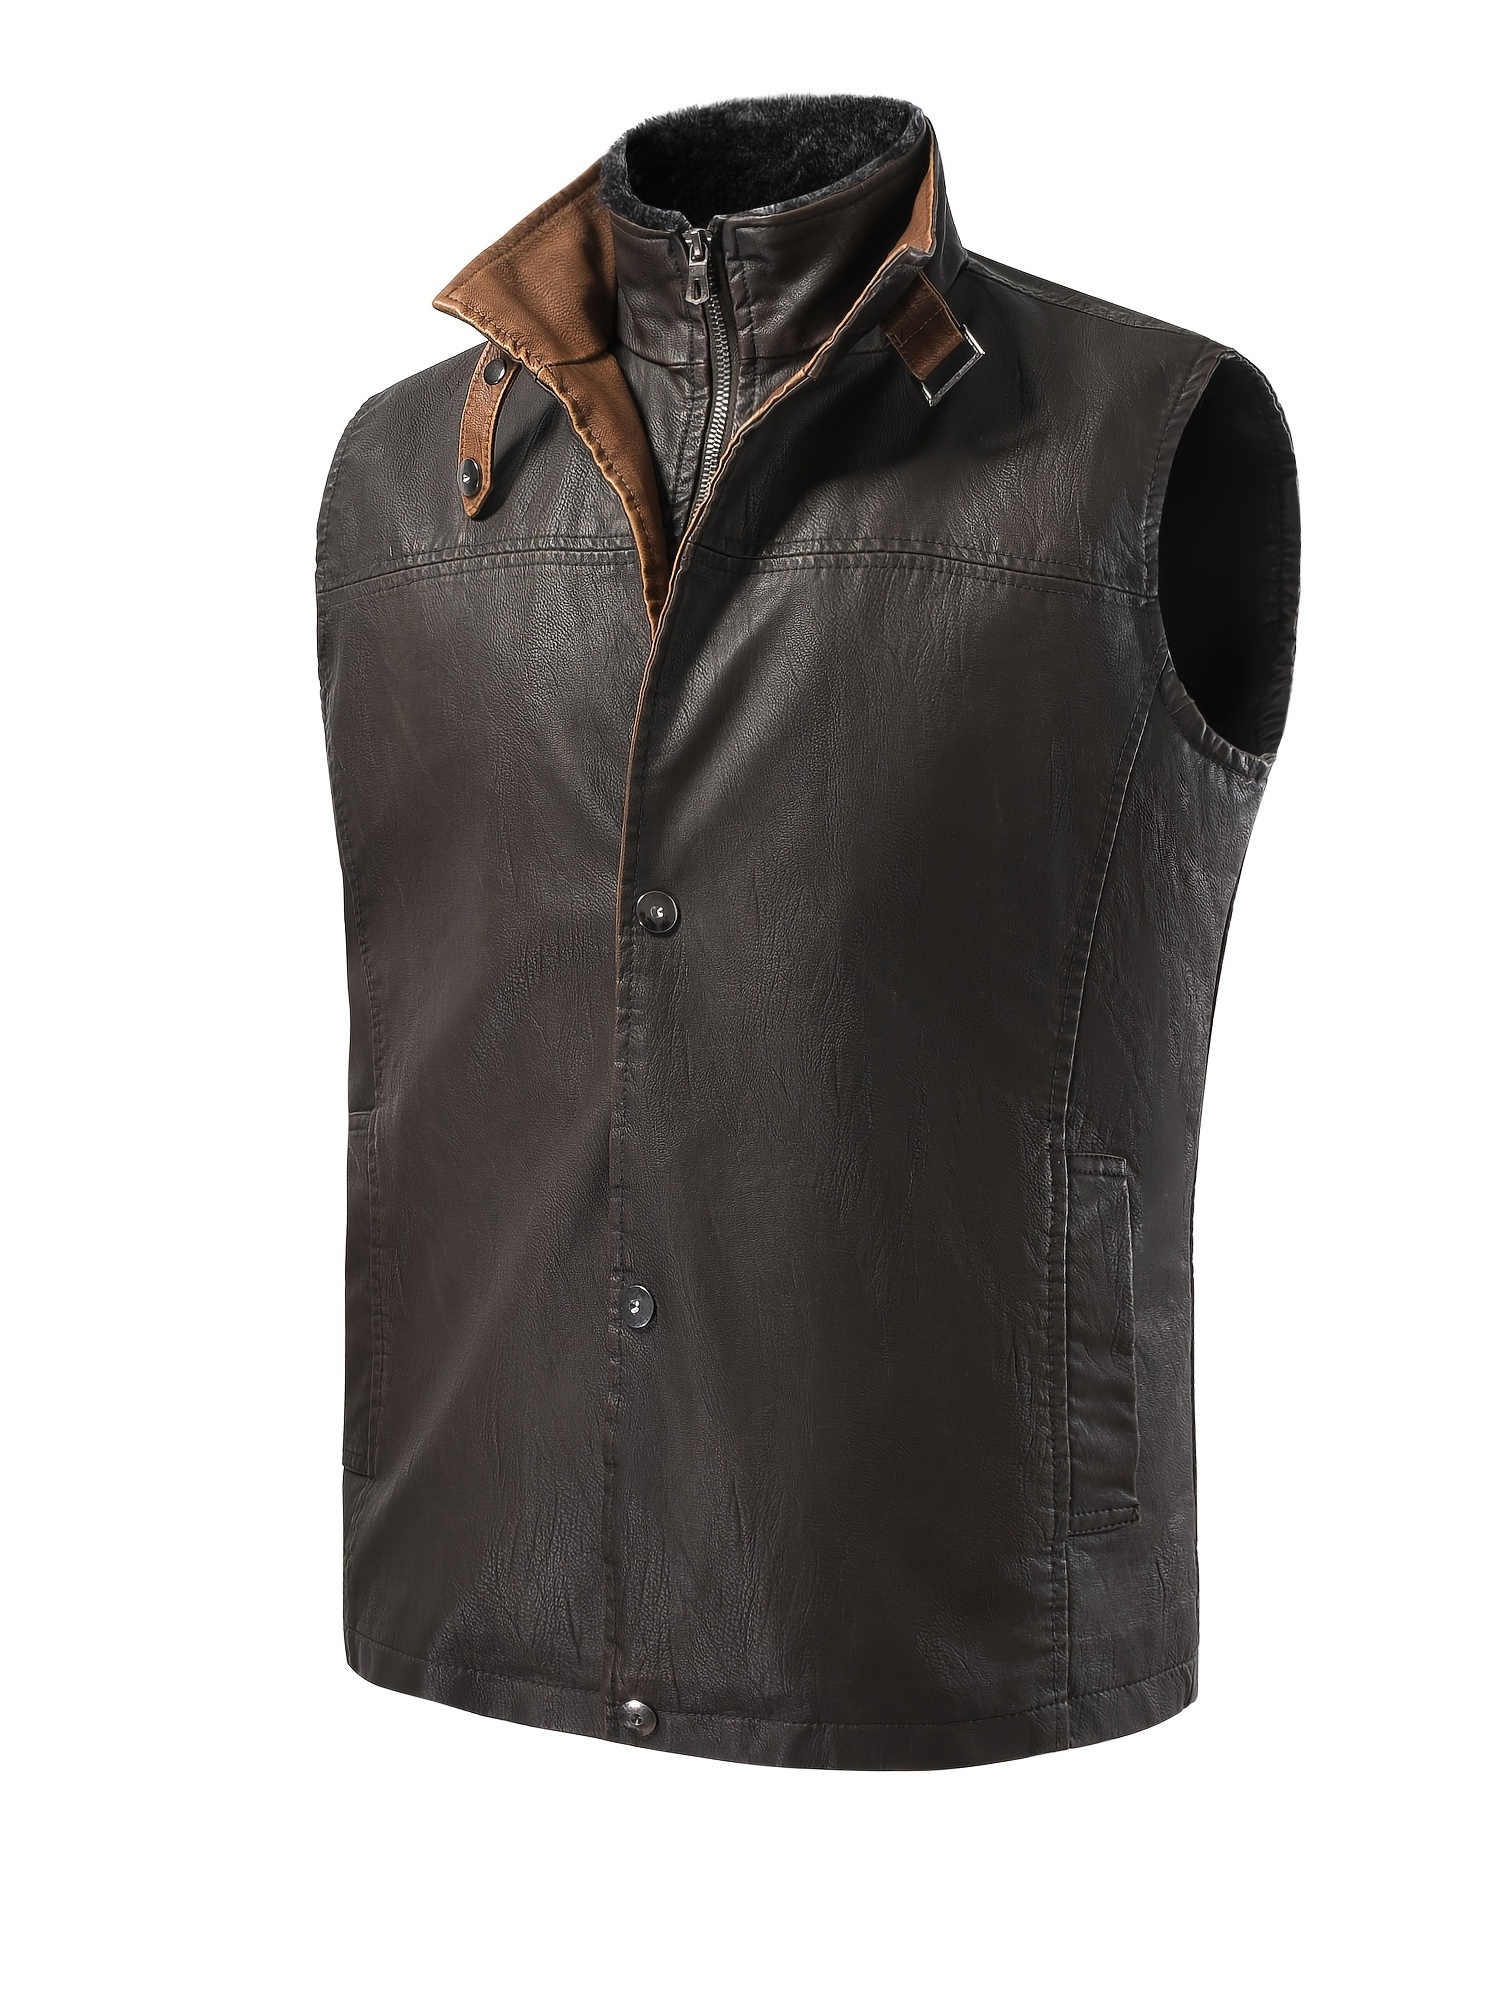 Fashionable sleeveless leather jacket For Comfort And Style 